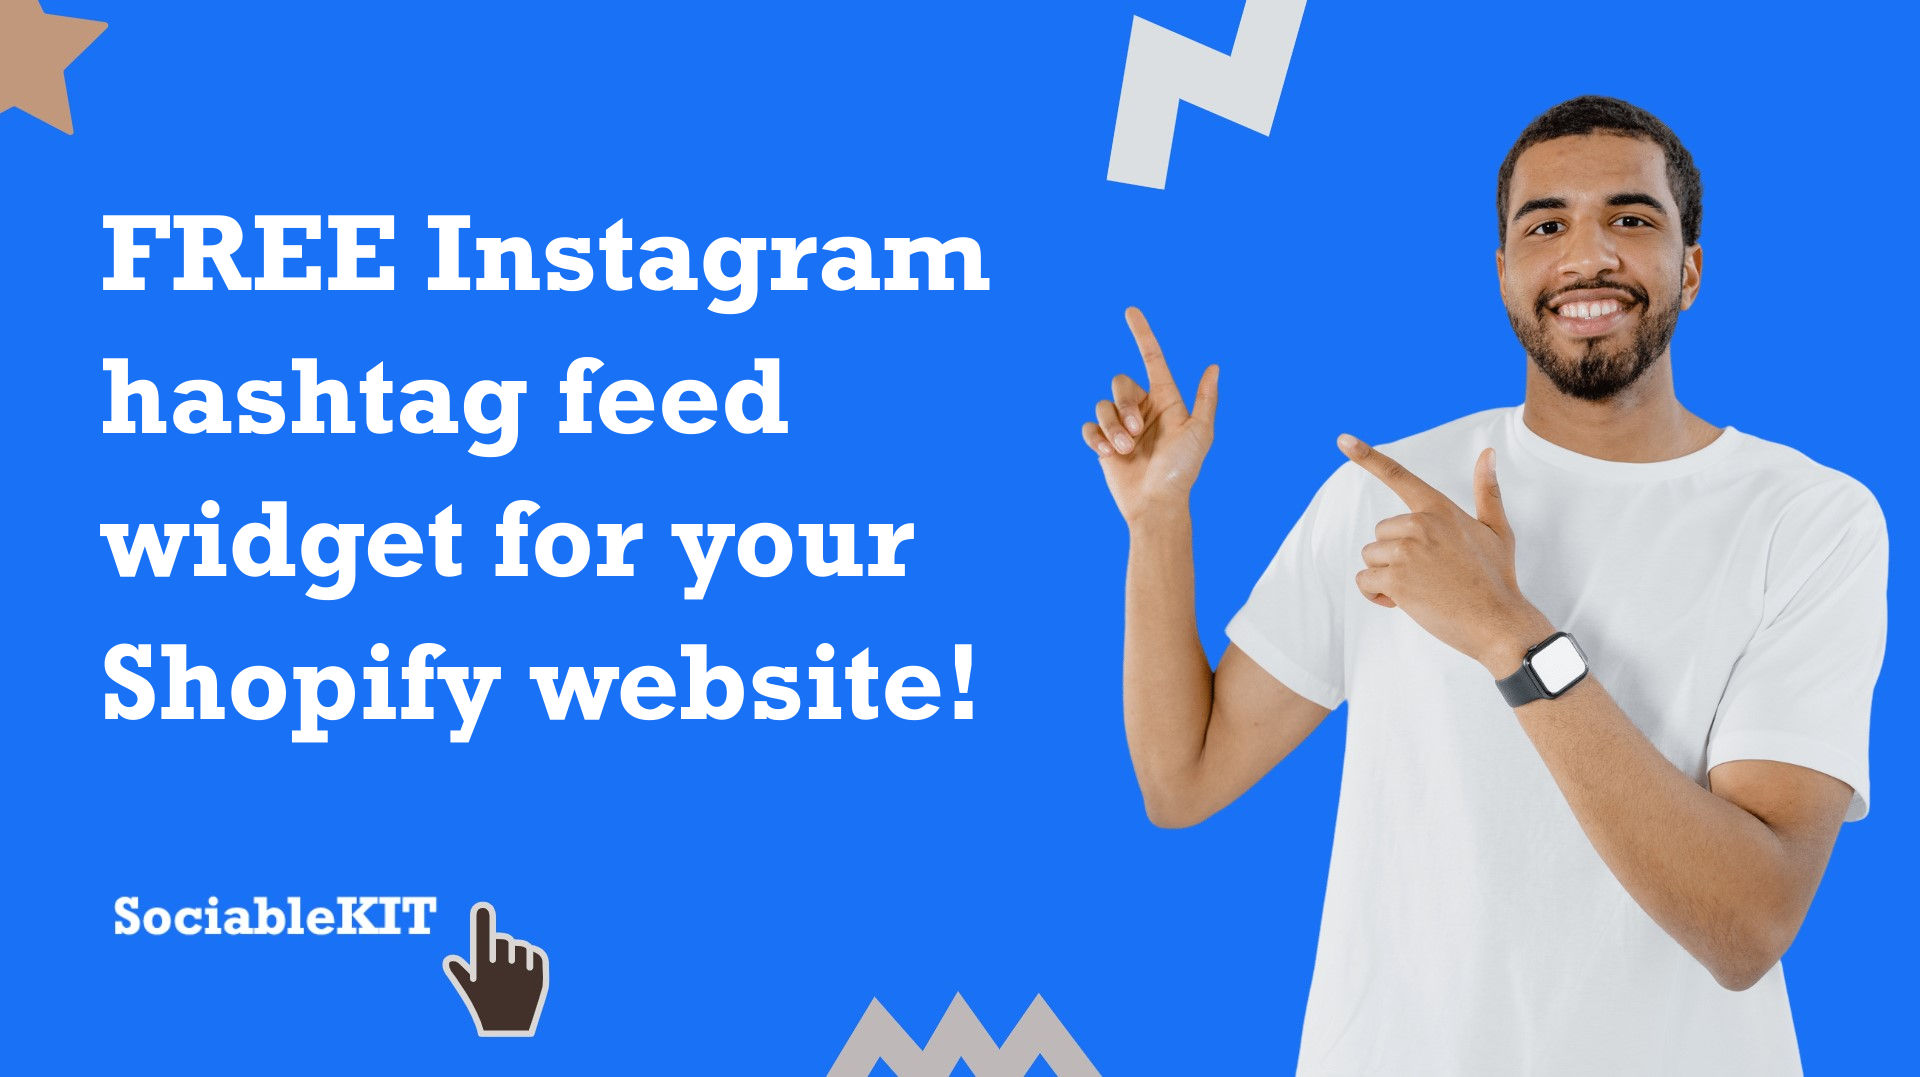 Free Instagram hashtag feed widget for your Shopify website